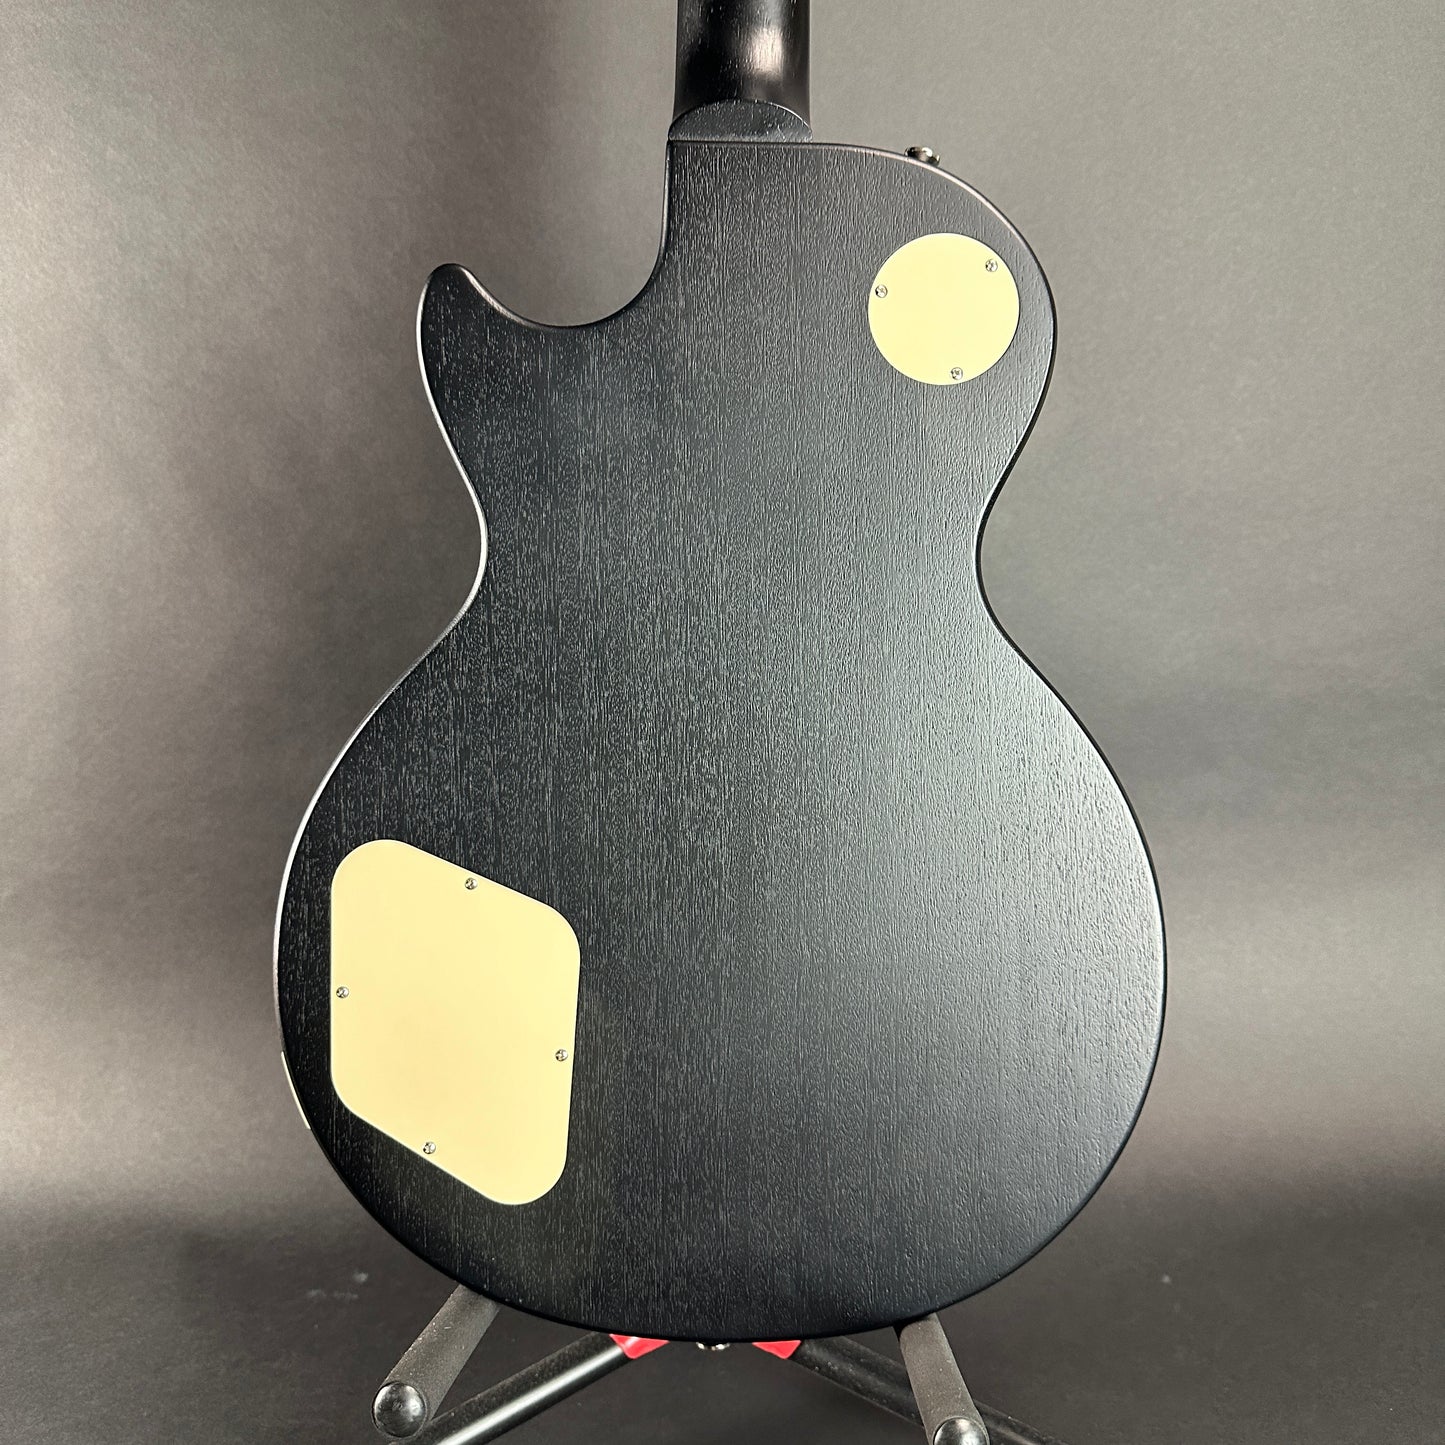 Back of body of Used Epiphone Les Paul Traditional Pro IV.